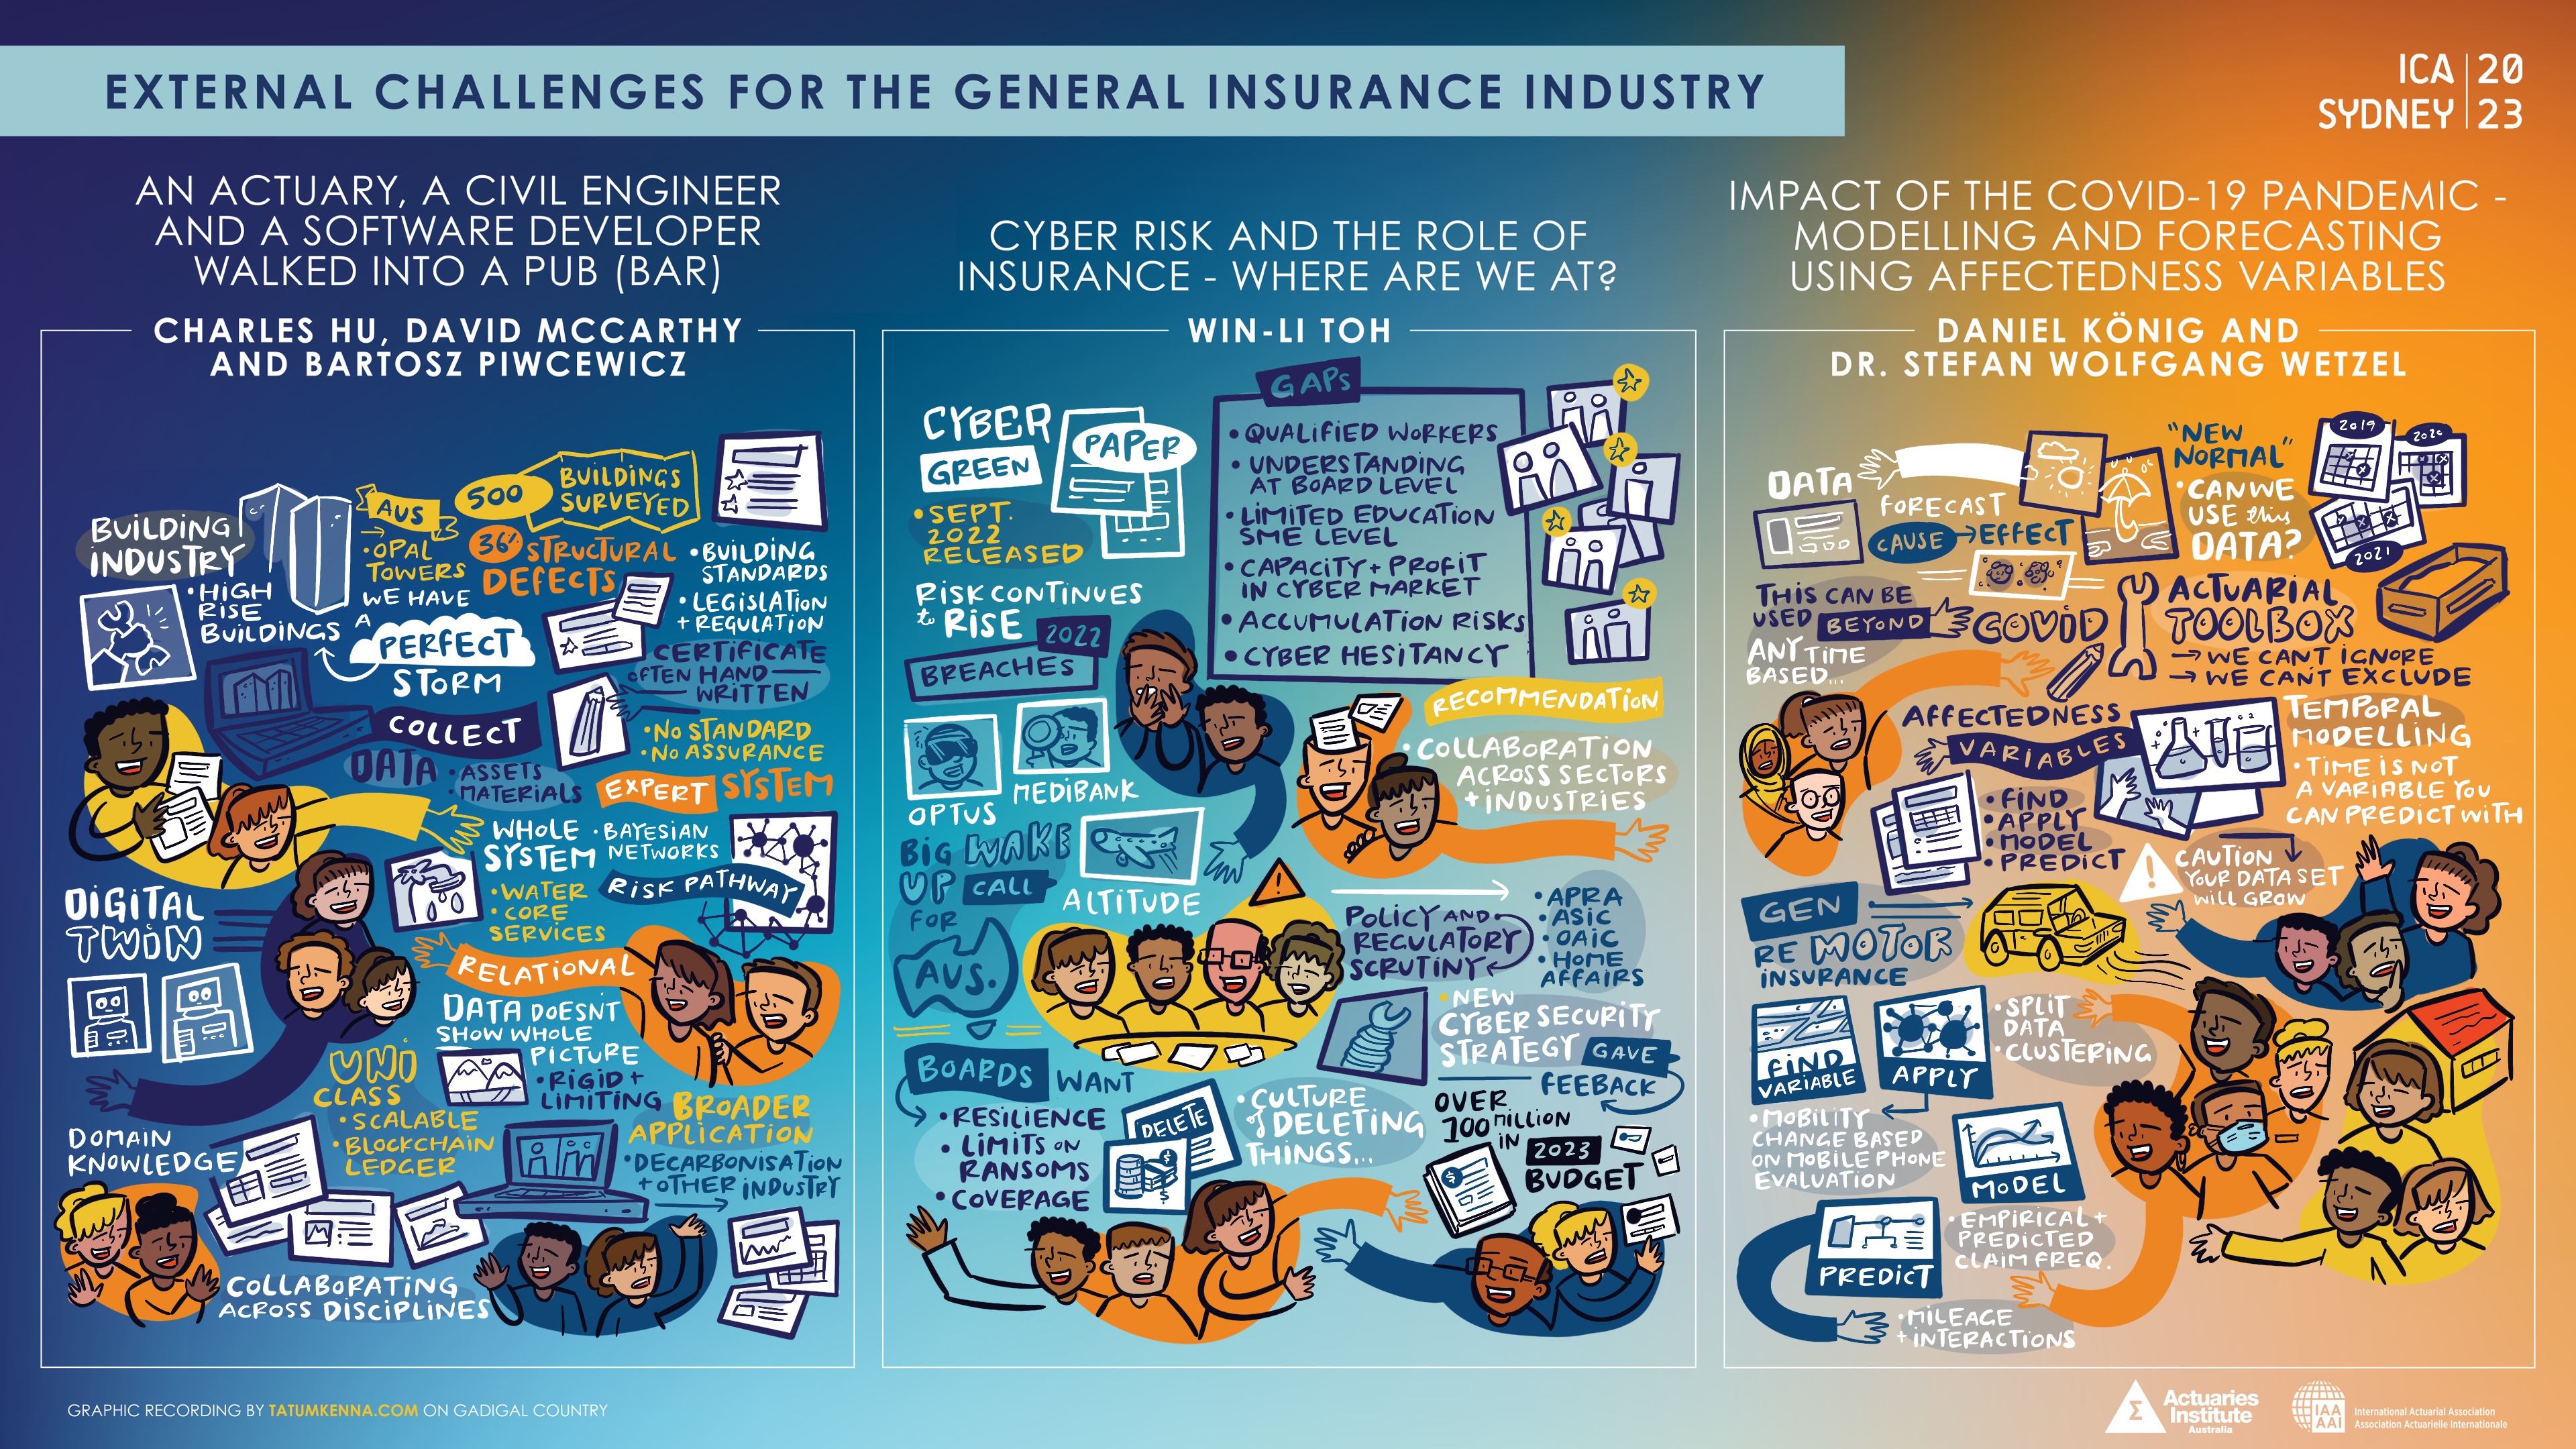 External challenges for the General Insurance Industry